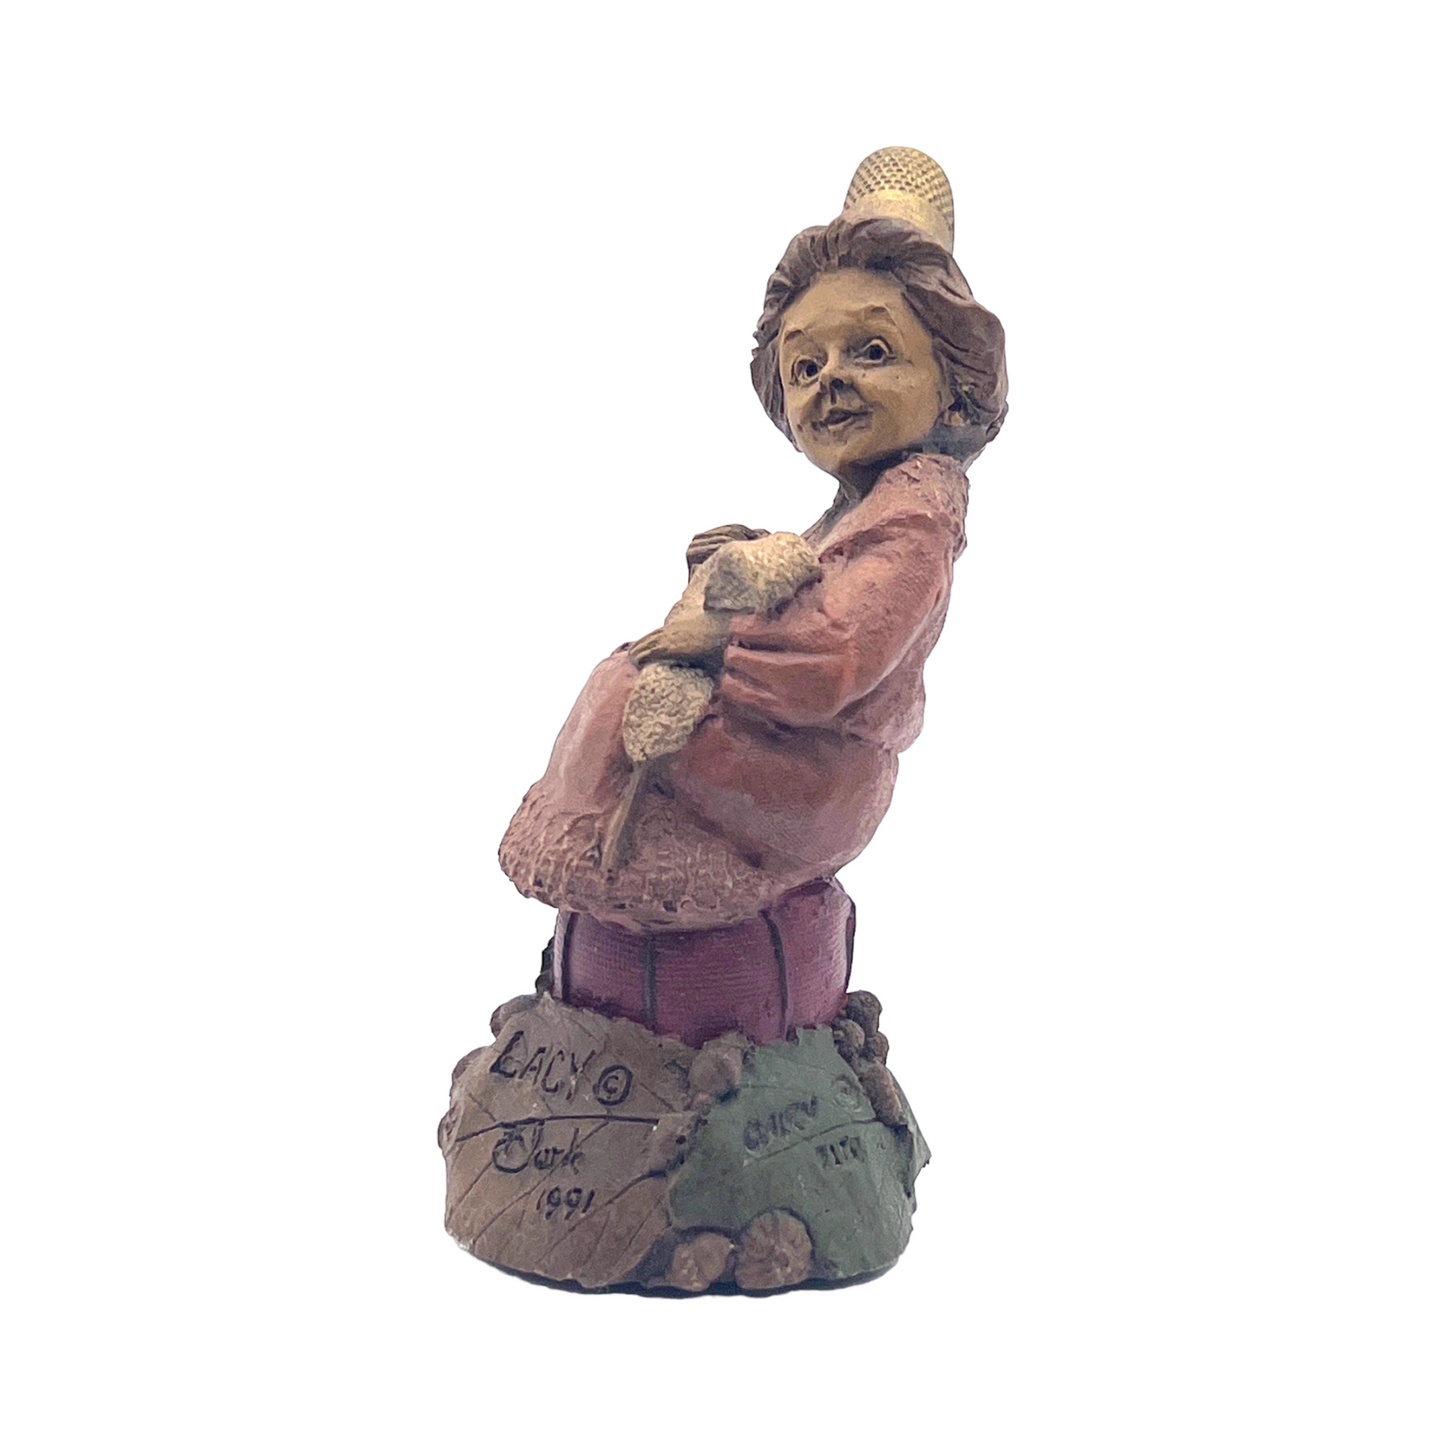 Tom Clark Gnome by Cairn Studios - Signed 1990 Promo Lacy - 5"